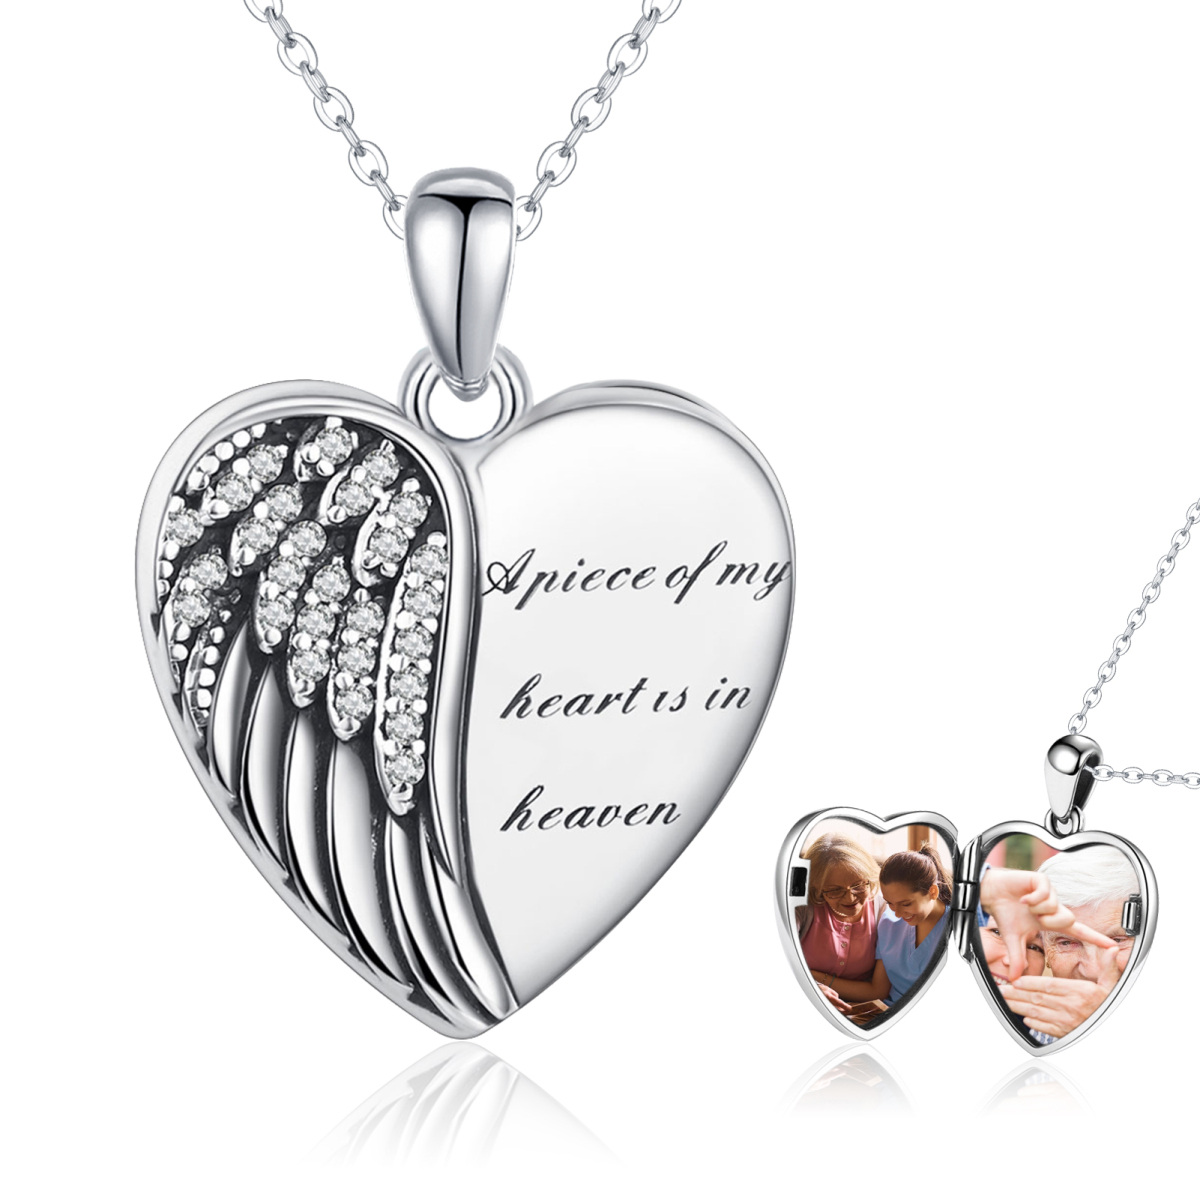 Sterling Silver Circular Shaped Feather & Heart Personalized Photo Locket Necklace with Engraved Word-1